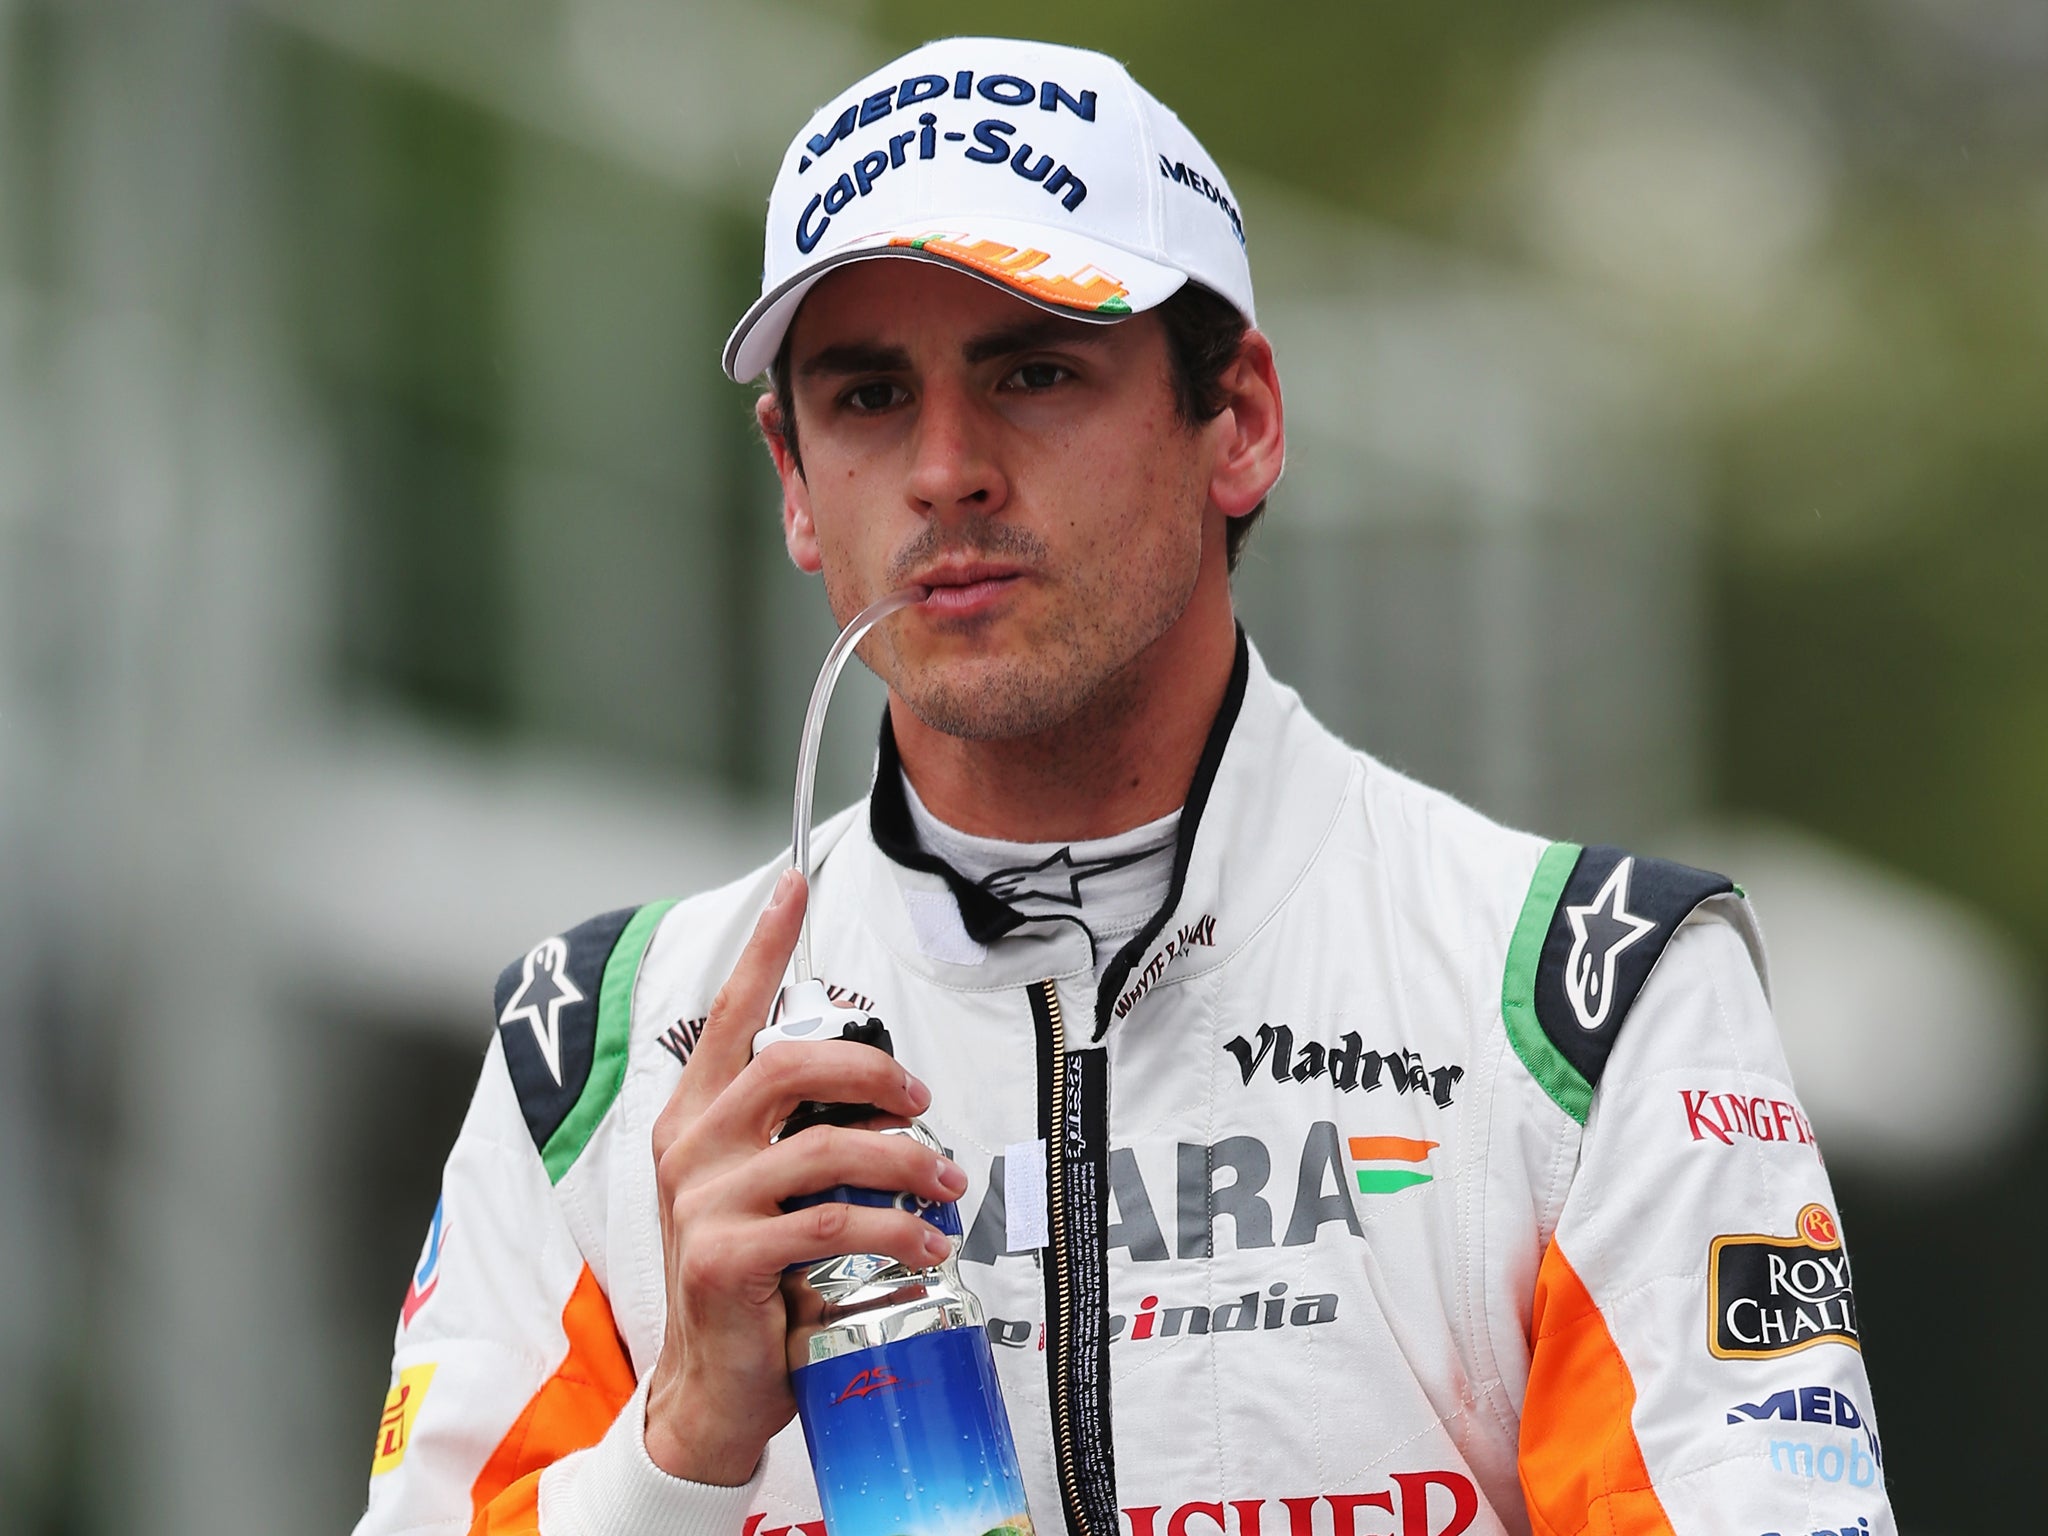 Adrian Sutil has been confirmed as a Sauber driver for 2014 after he was replaced at Force India by fellow-German Nico Hulkenberg